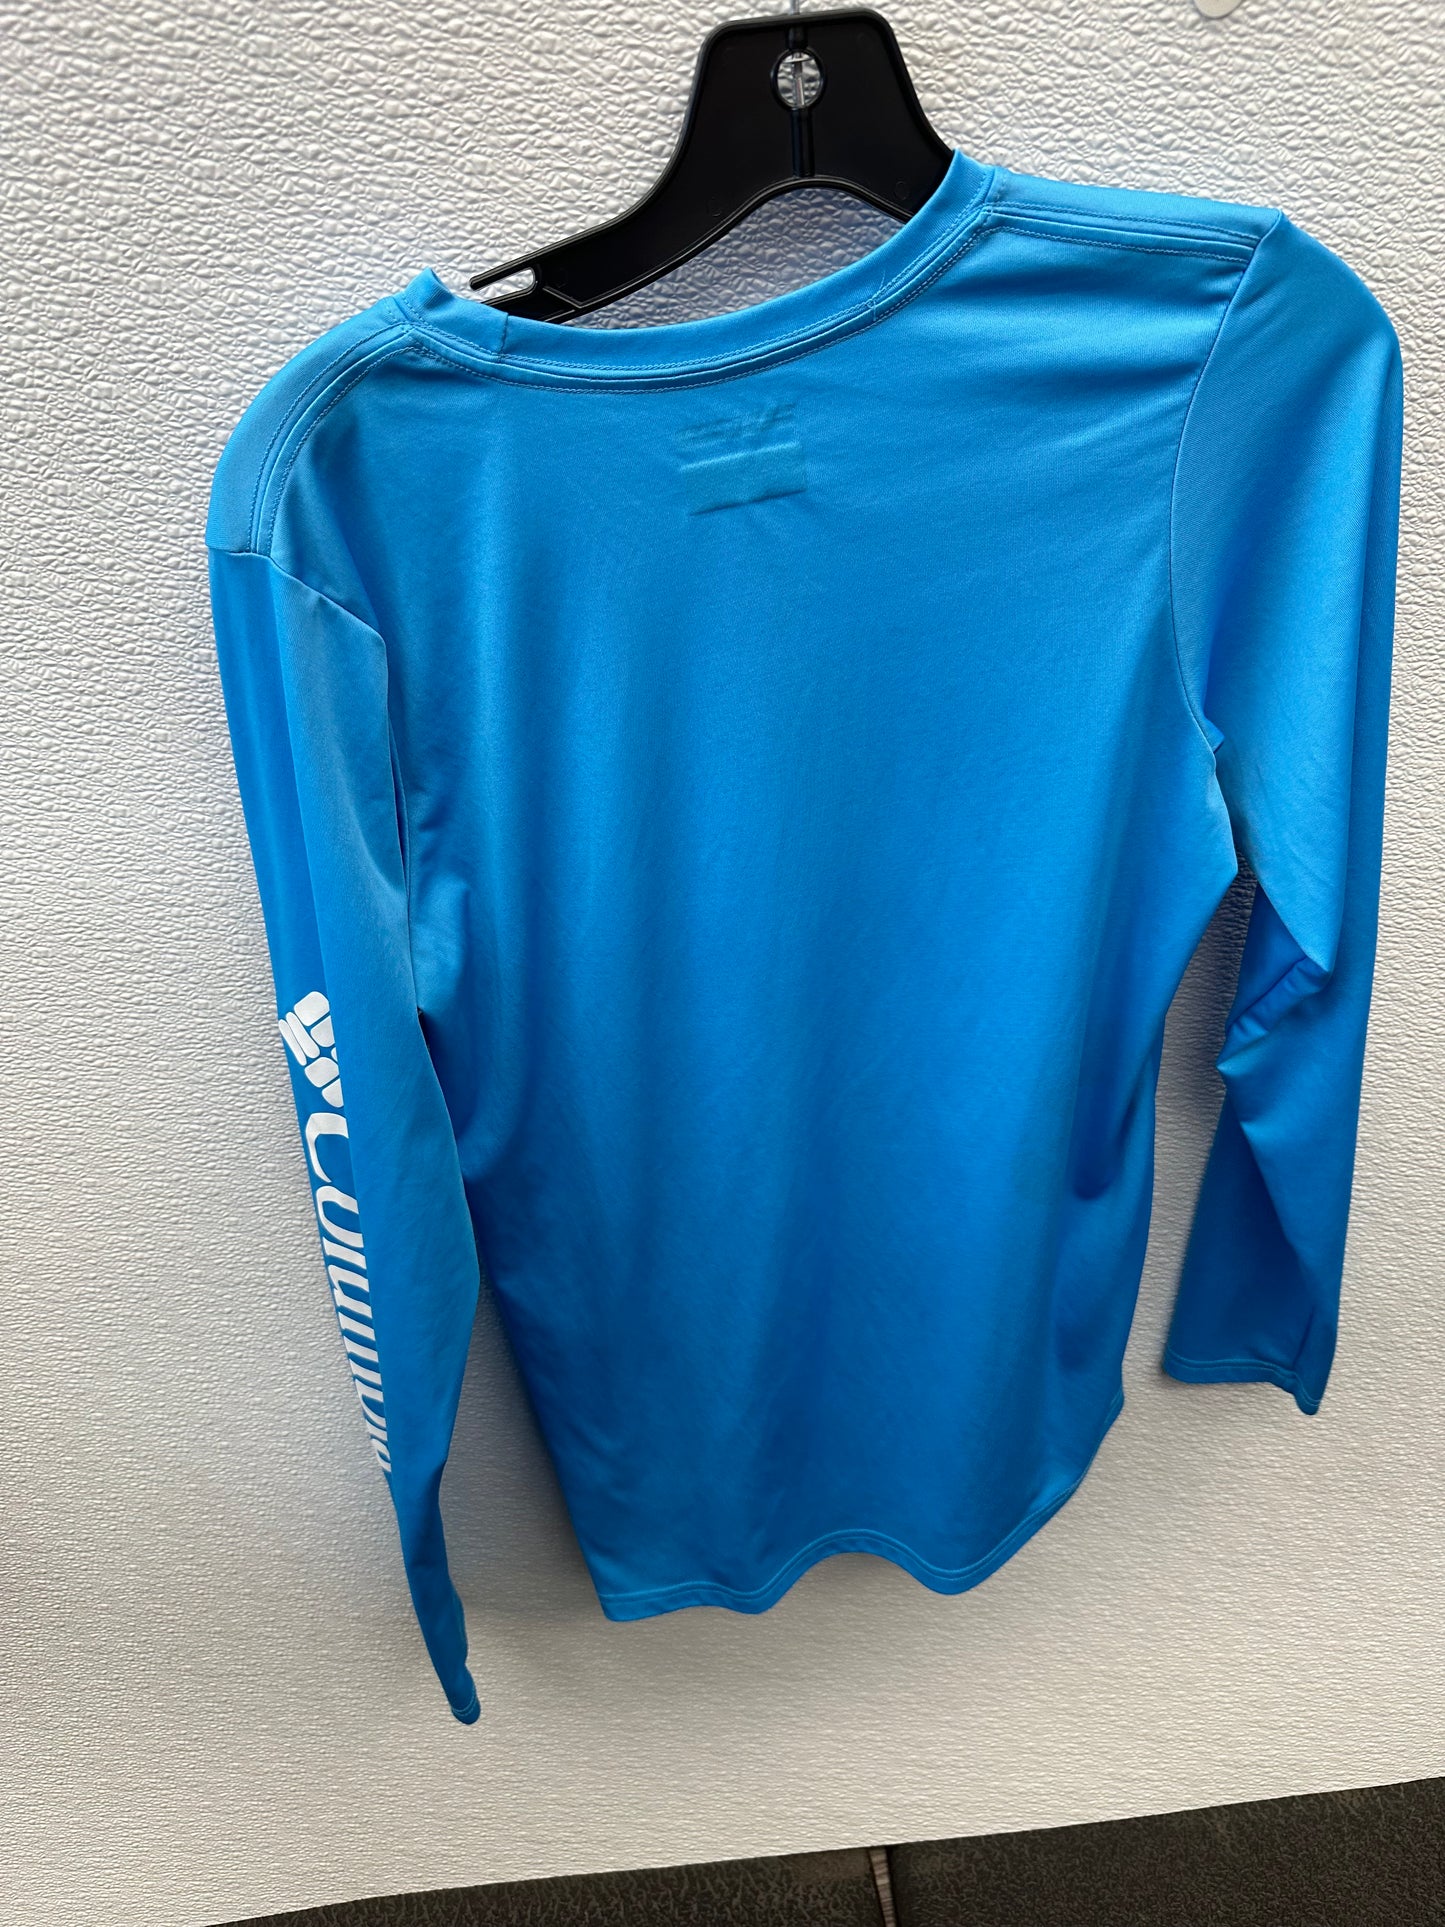 Athletic Top Long Sleeve Collar By Columbia  Size: Xl